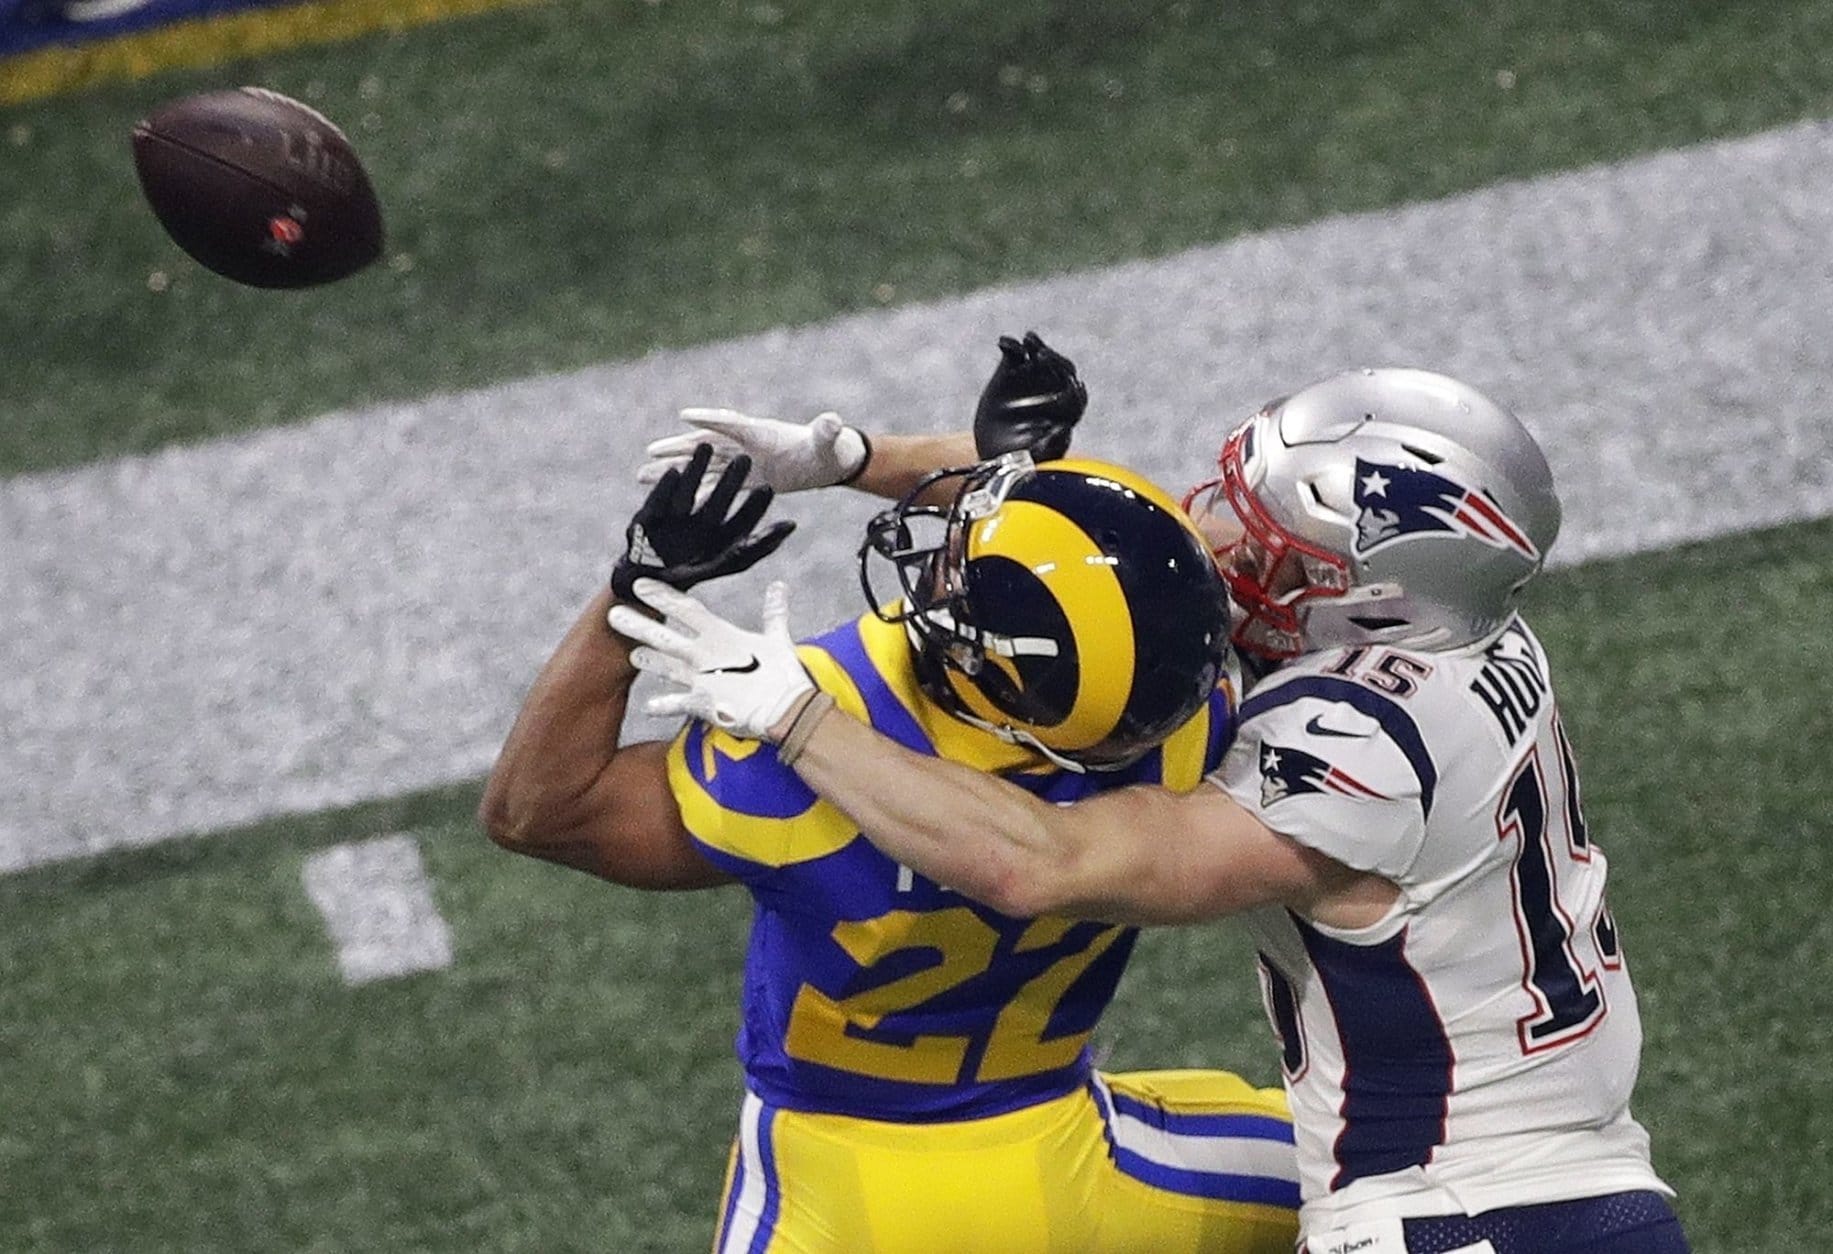 Los Angeles Rams' Marcus Peters (22) breaks up a pass intended for New England Patriots' Chris Hogan (15) during the second half of the NFL Super Bowl 53 football game Sunday, Feb. 3, 2019, in Atlanta. (AP Photo/Charlie Riedel)